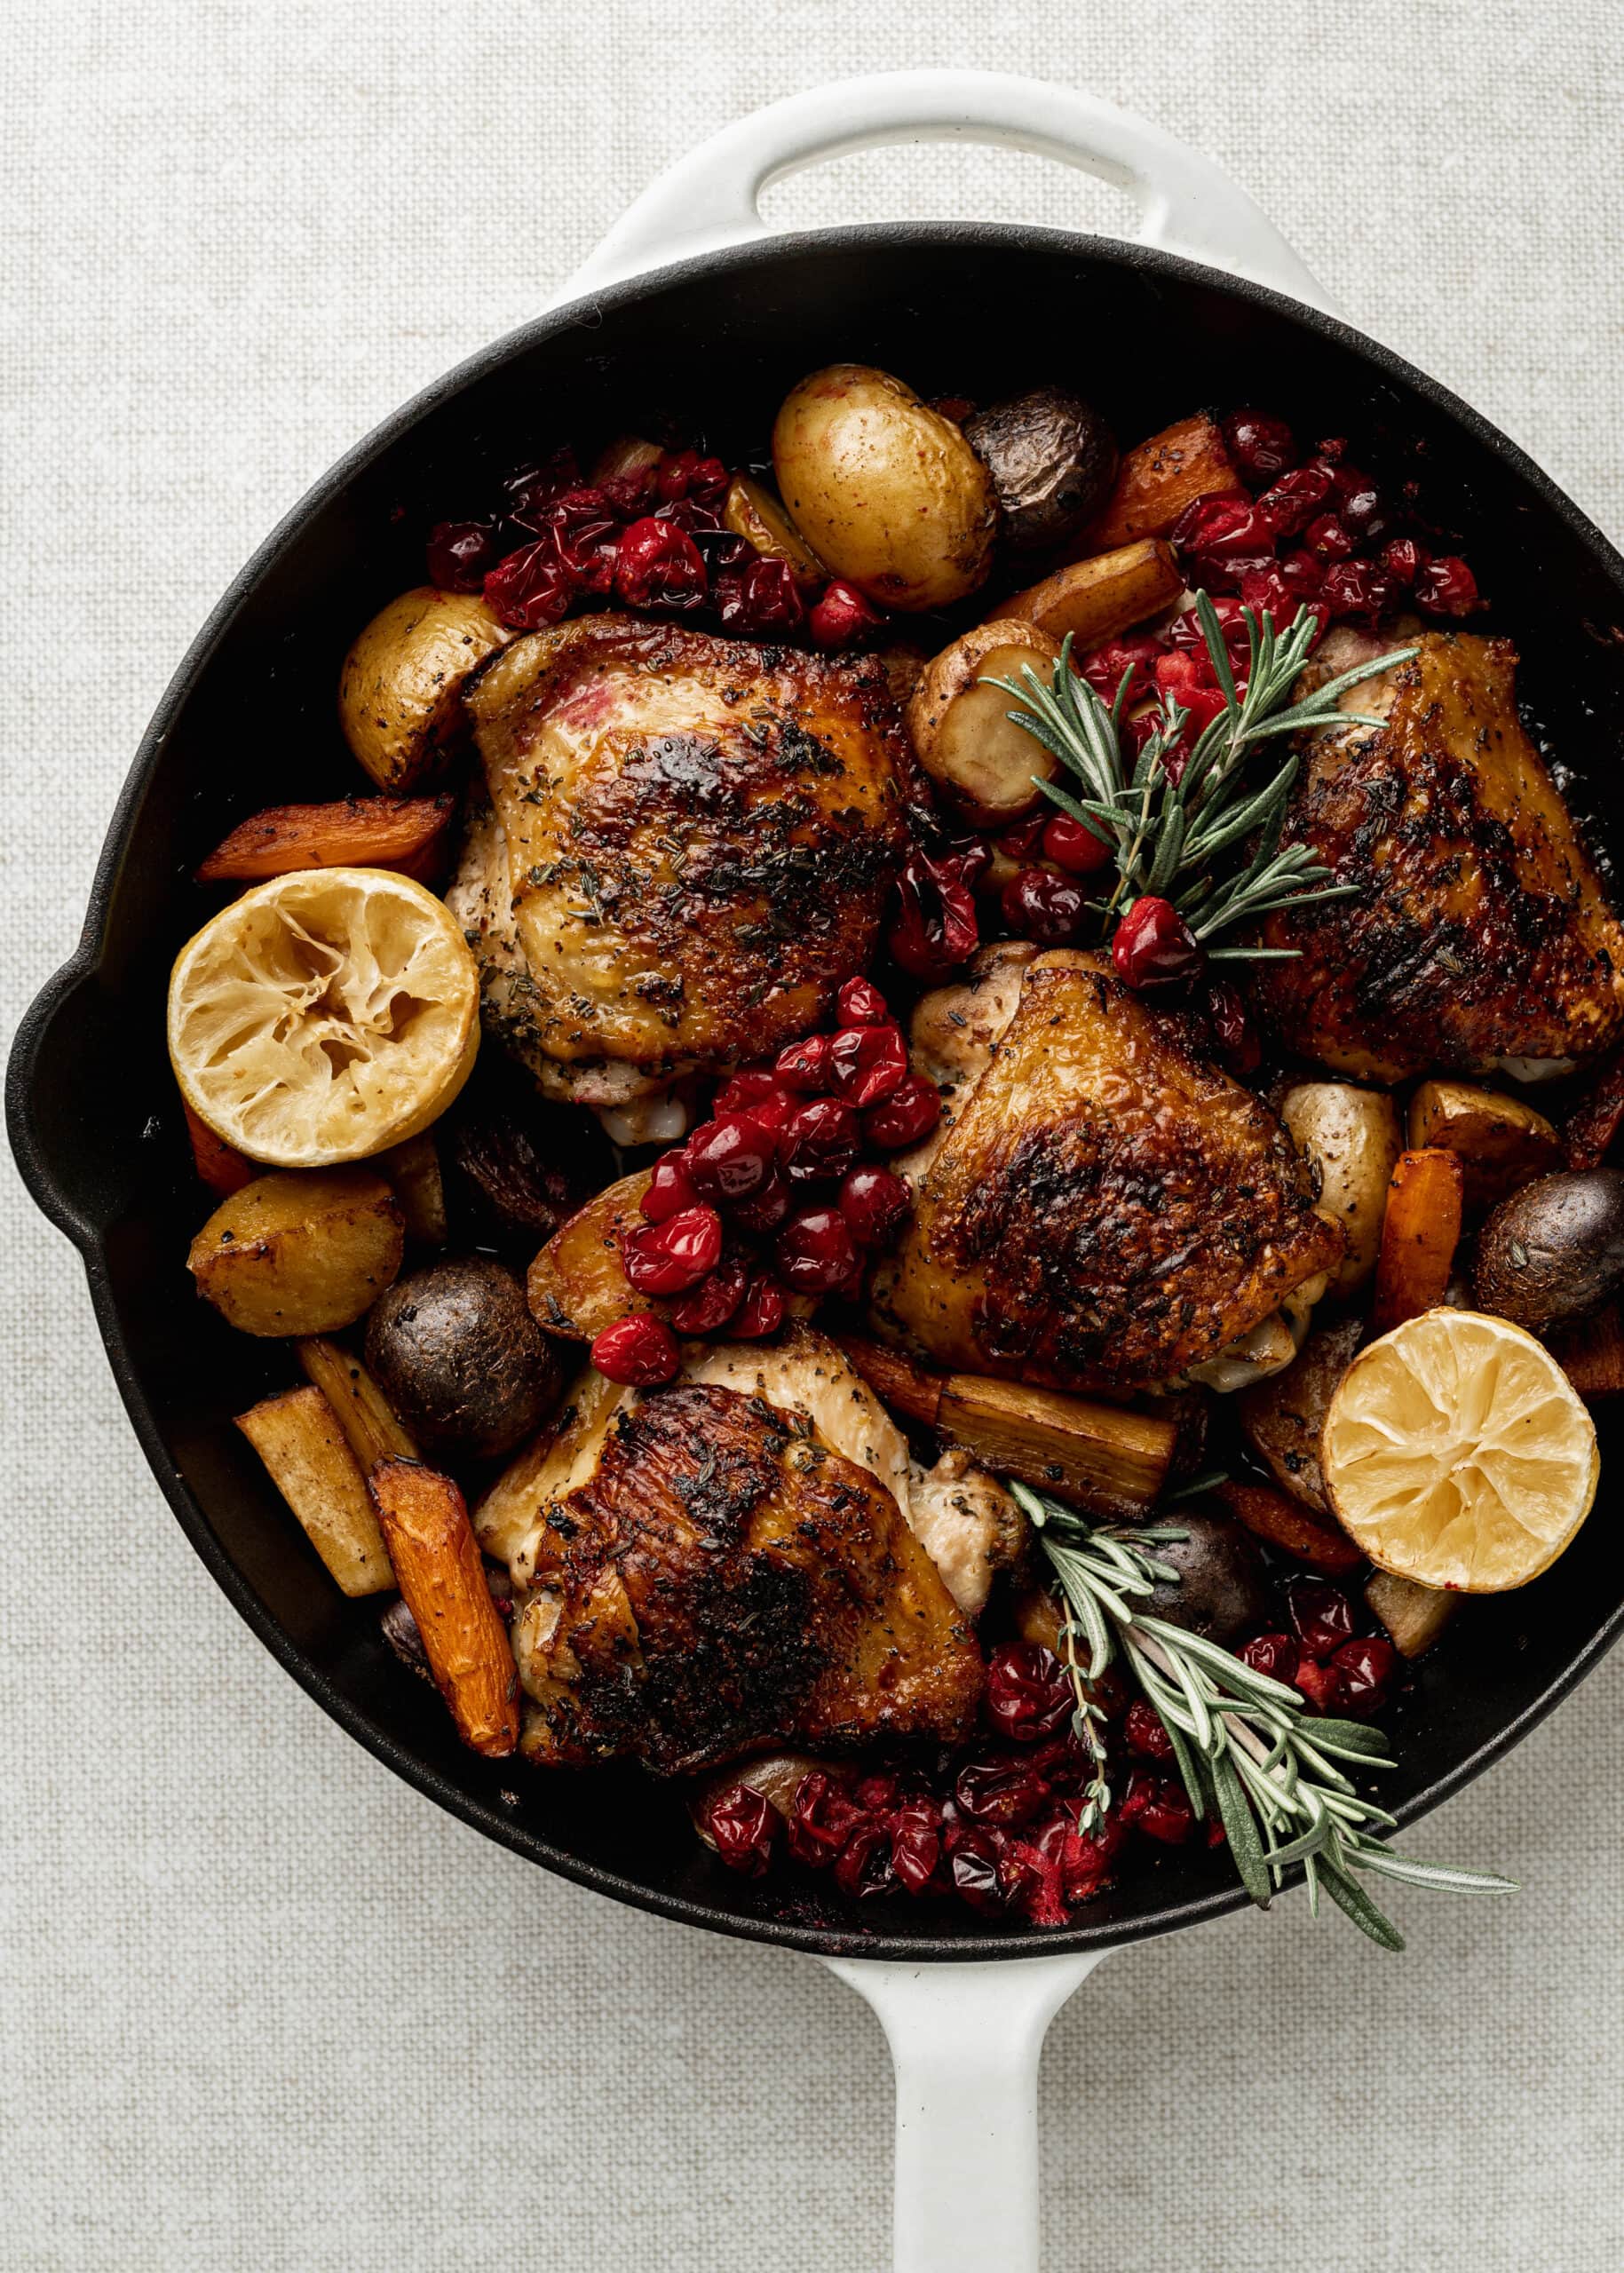 A large white skillet with with potatoes, carrots, and parsnsips with chicken thighs, rosemary, and cranberries.